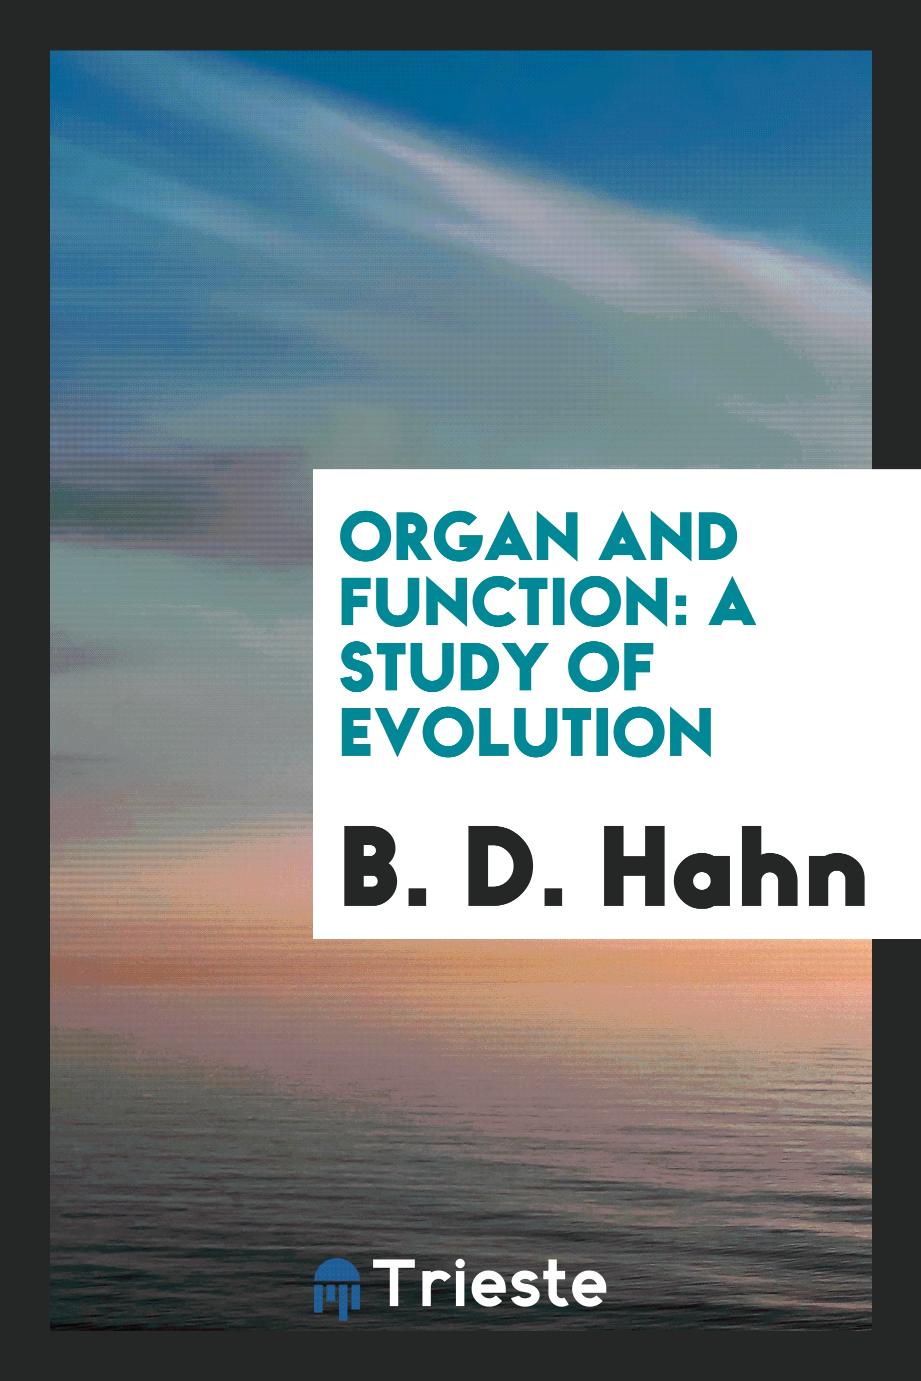 Organ and function: a study of evolution